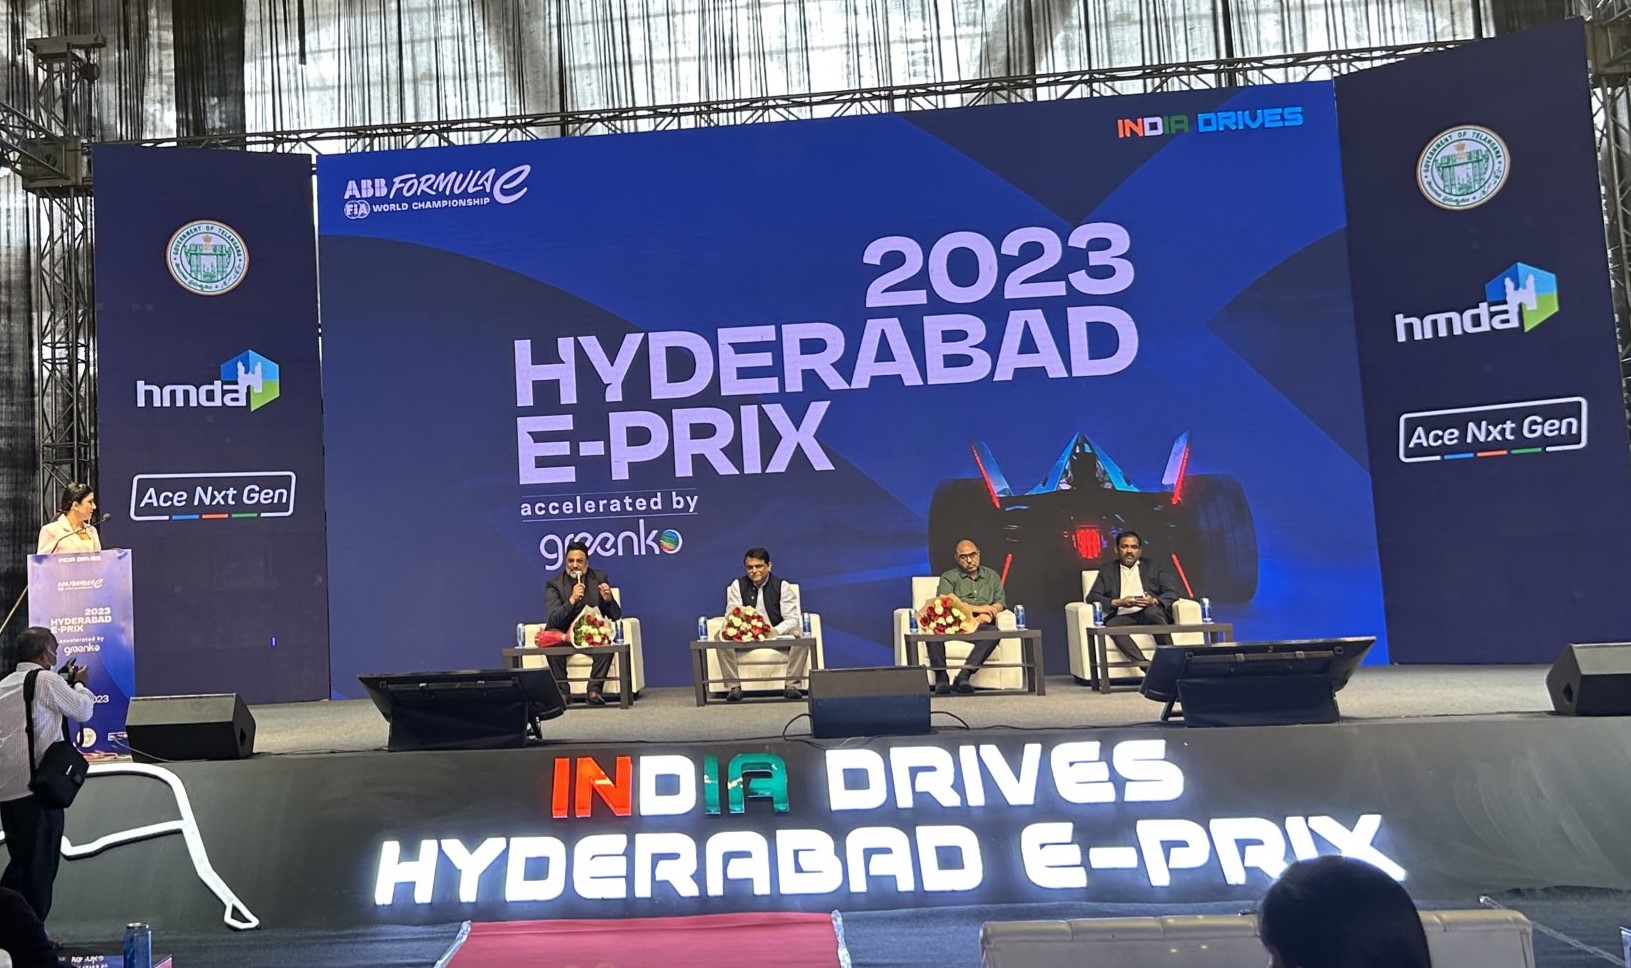 Tickets open for the Hyderabad Formula E race, also known as Hyderabad E prix, on 11 February, 2023 in Hyderabad.